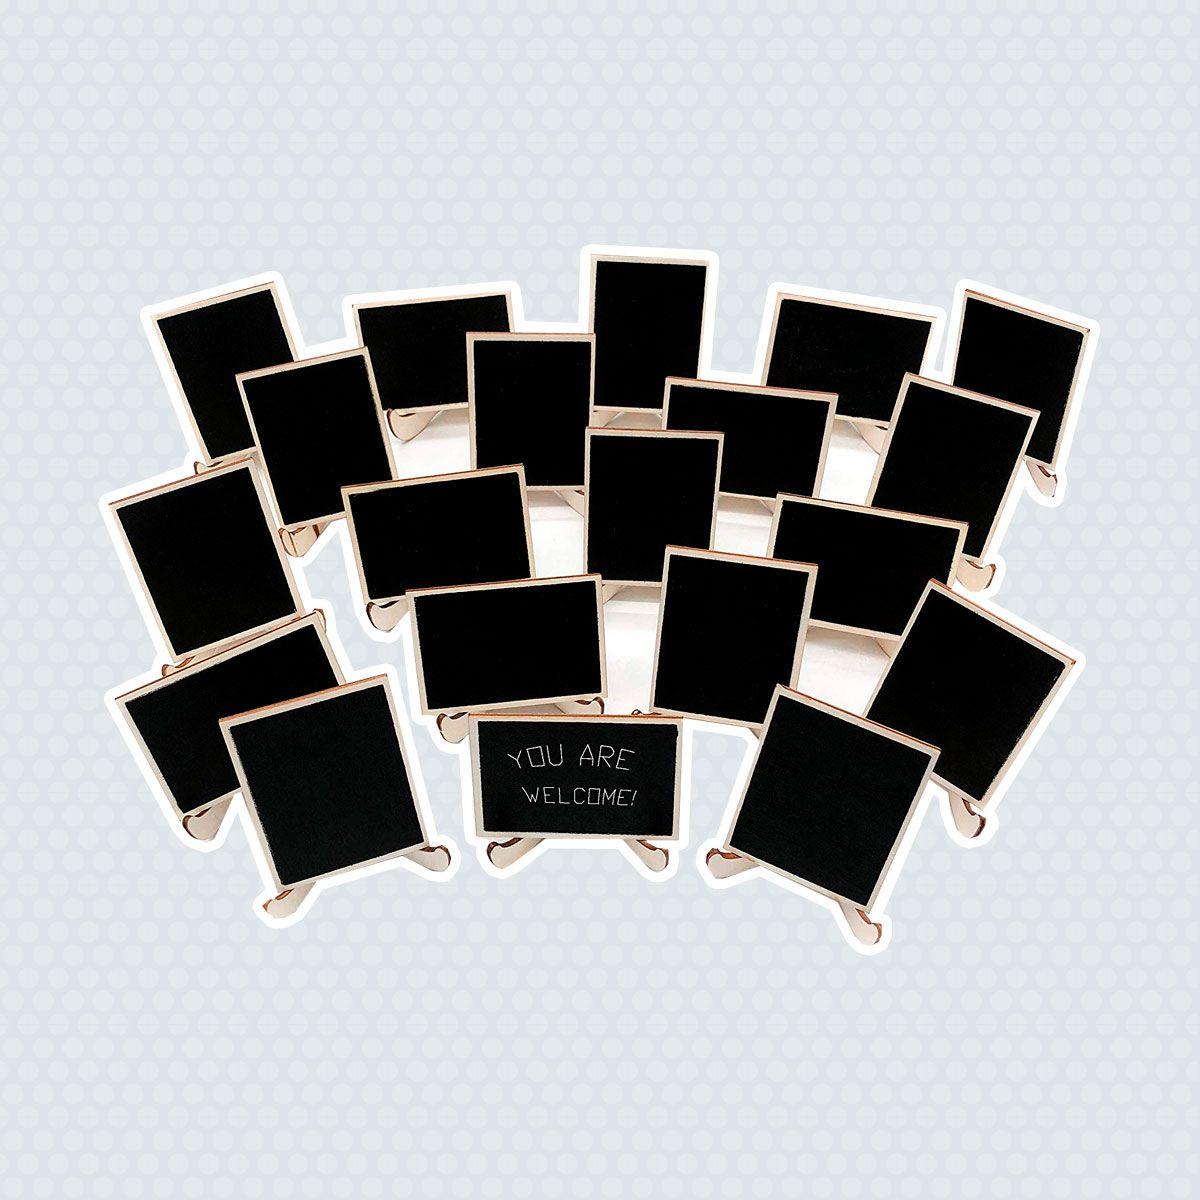 Tasteofhome.com Logo - Buffet Labels You Need For Your Next Party. Taste of Home